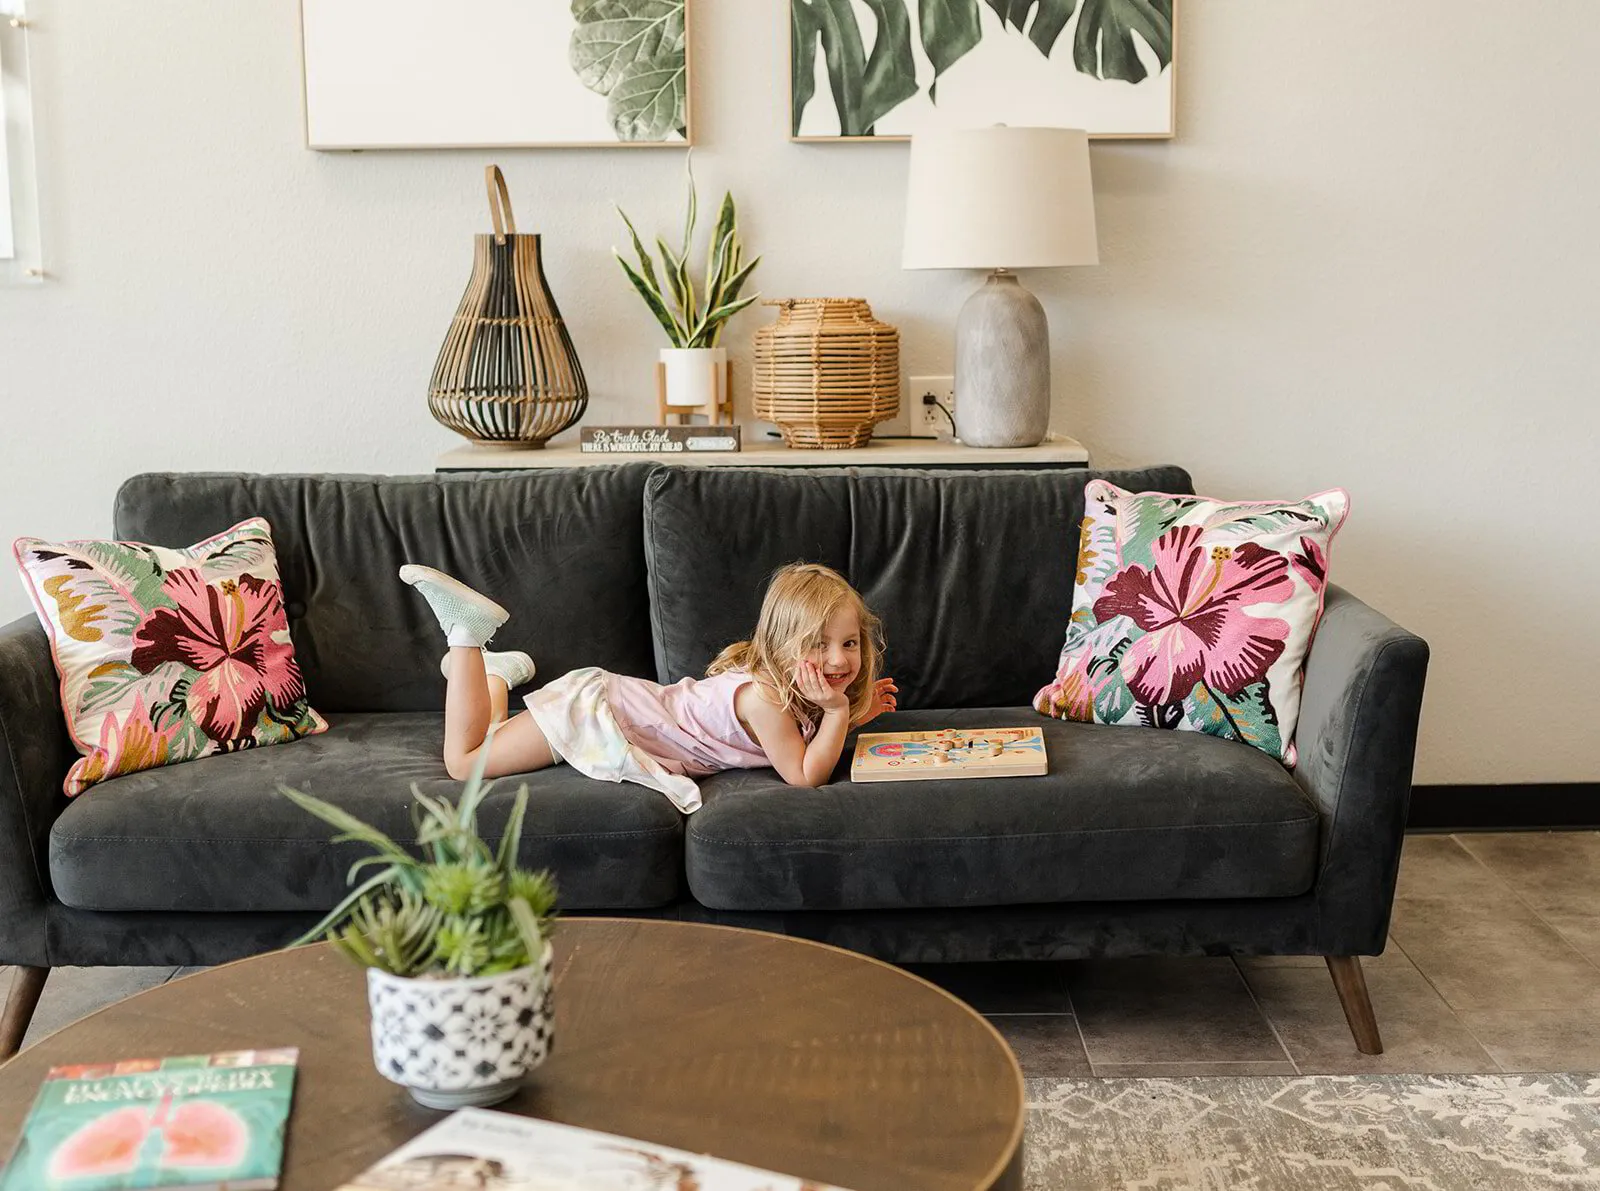 A young girl enjoys her time, playfully reading a puzzle book on a comfy gray sofa, surrounded by vibrant decor and houseplants, feeling at ease